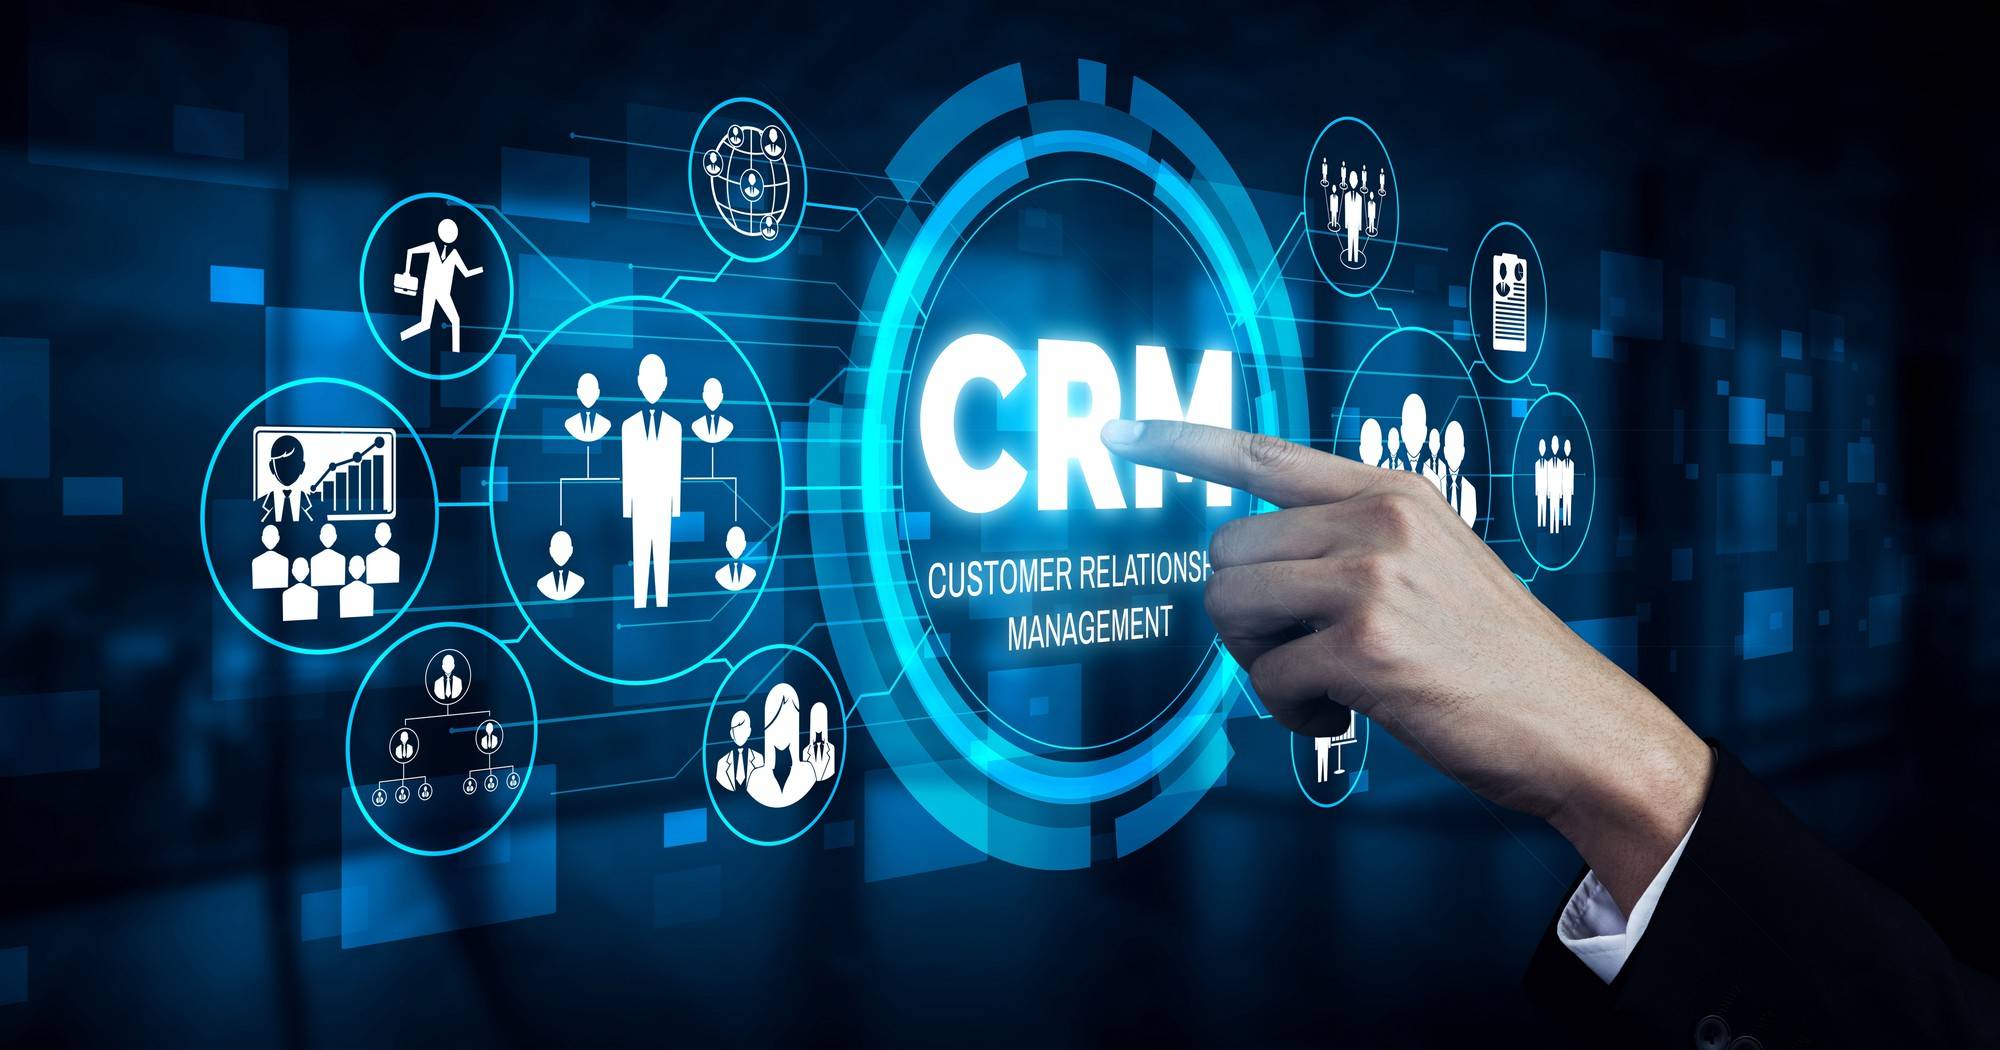 20230907235553 fpdl.in crm customer relationship management business sales marketing system concept 31965 13424 full - سیستم مدیریت ارتباط با مشتریان(CRM)